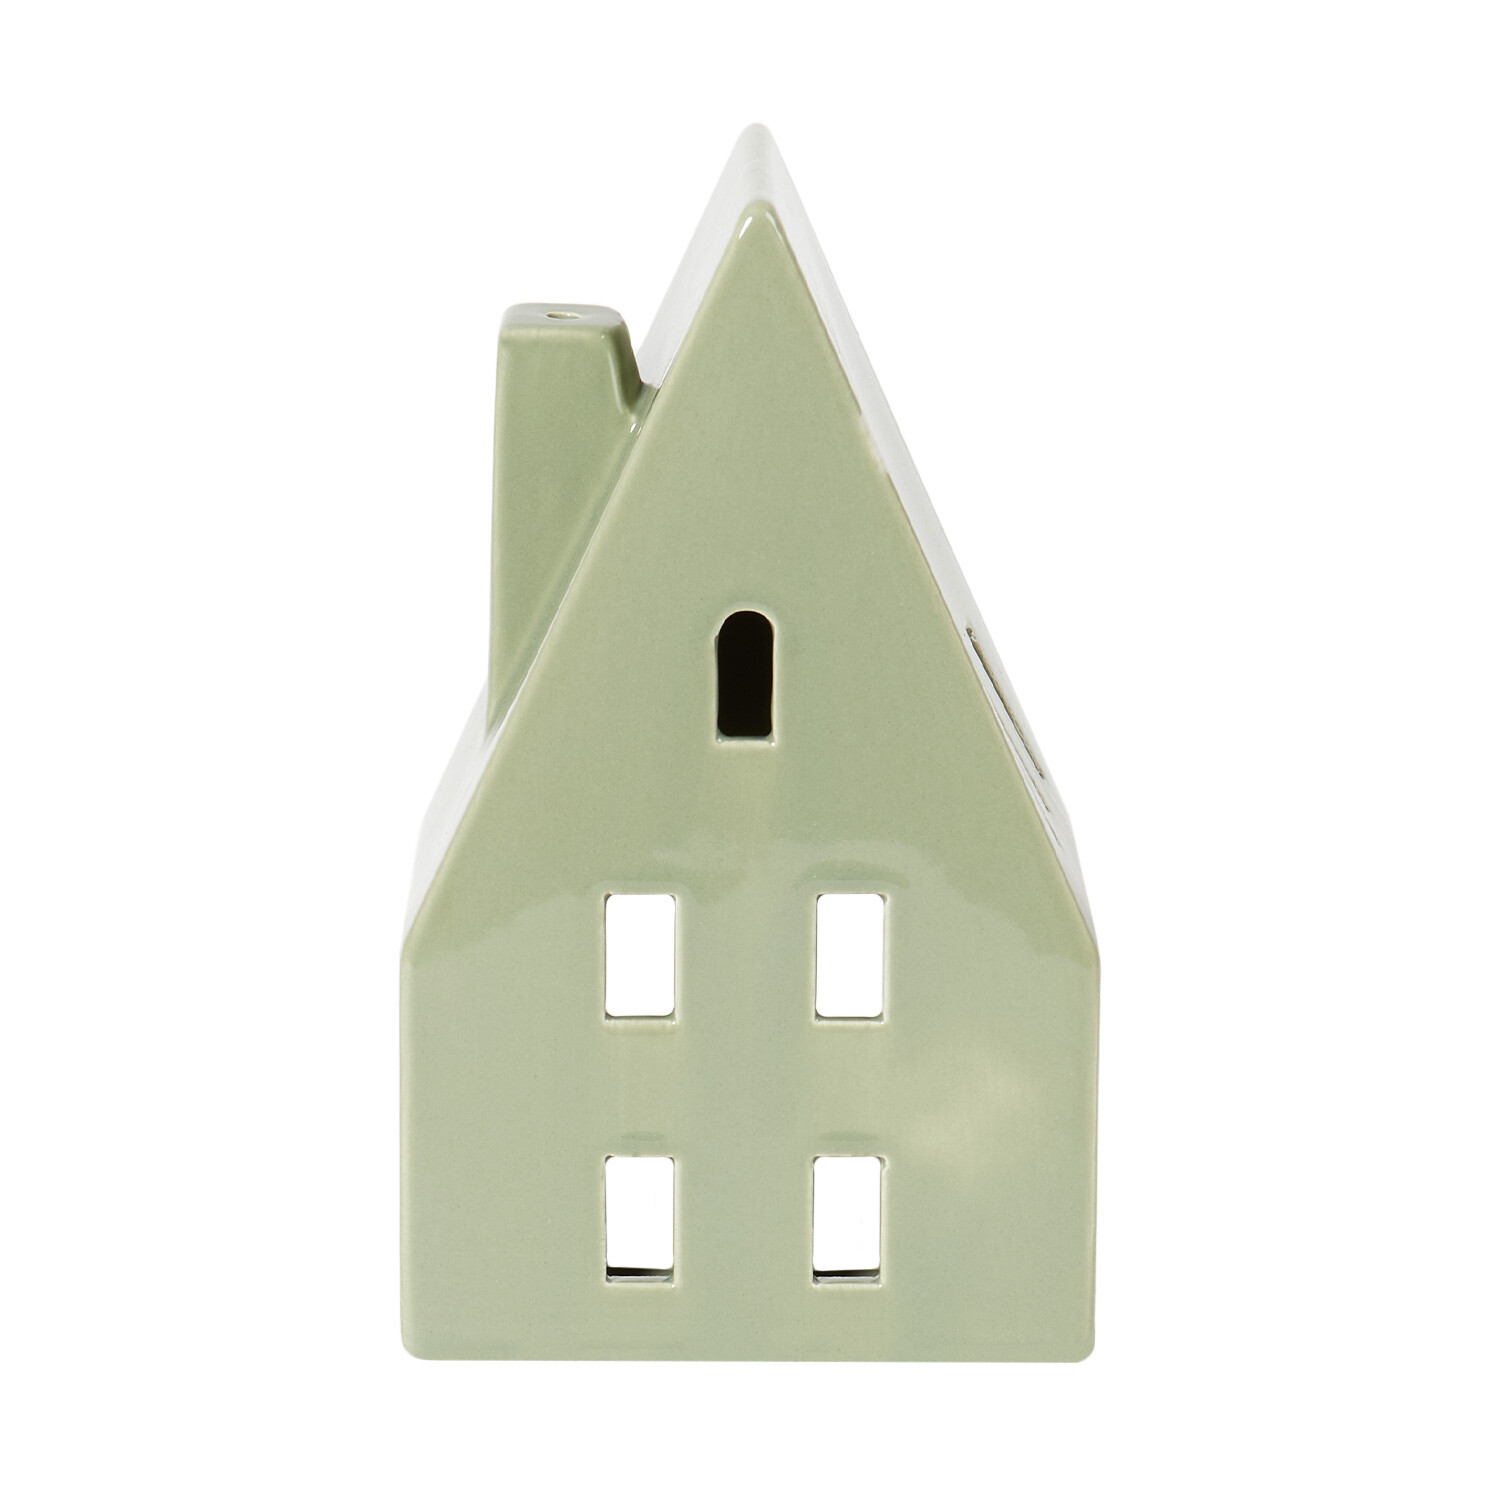 Nordic House Candle Holder Image 3